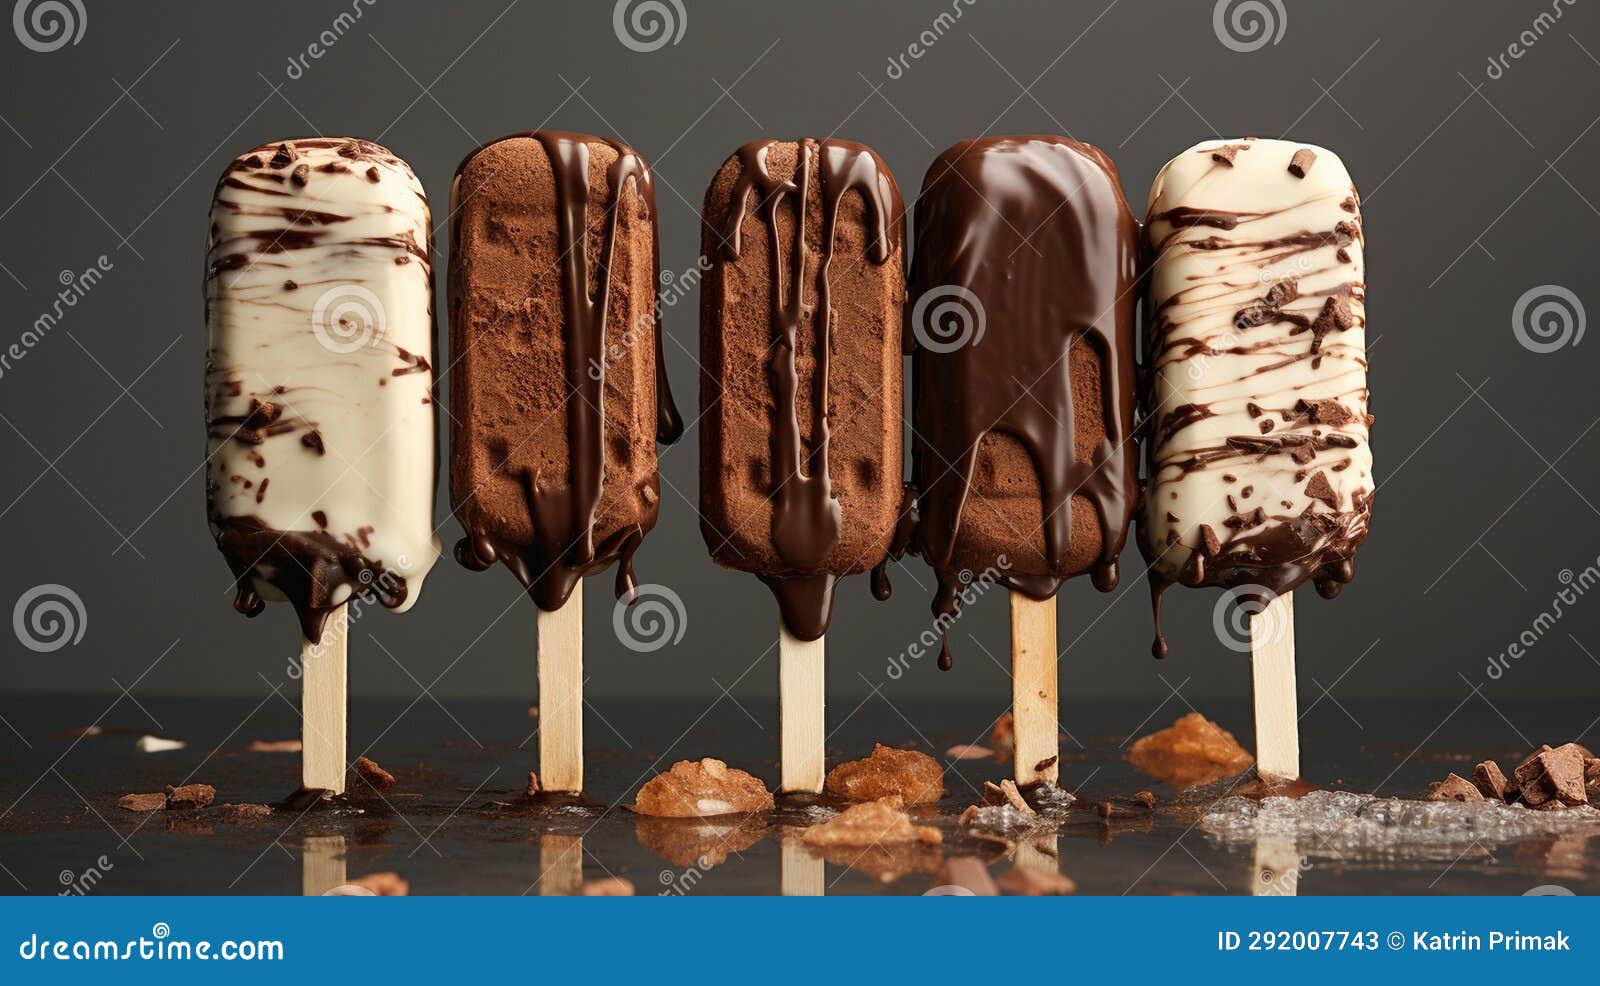 ice cream on a stick, chocolate-coated plombier with nuts